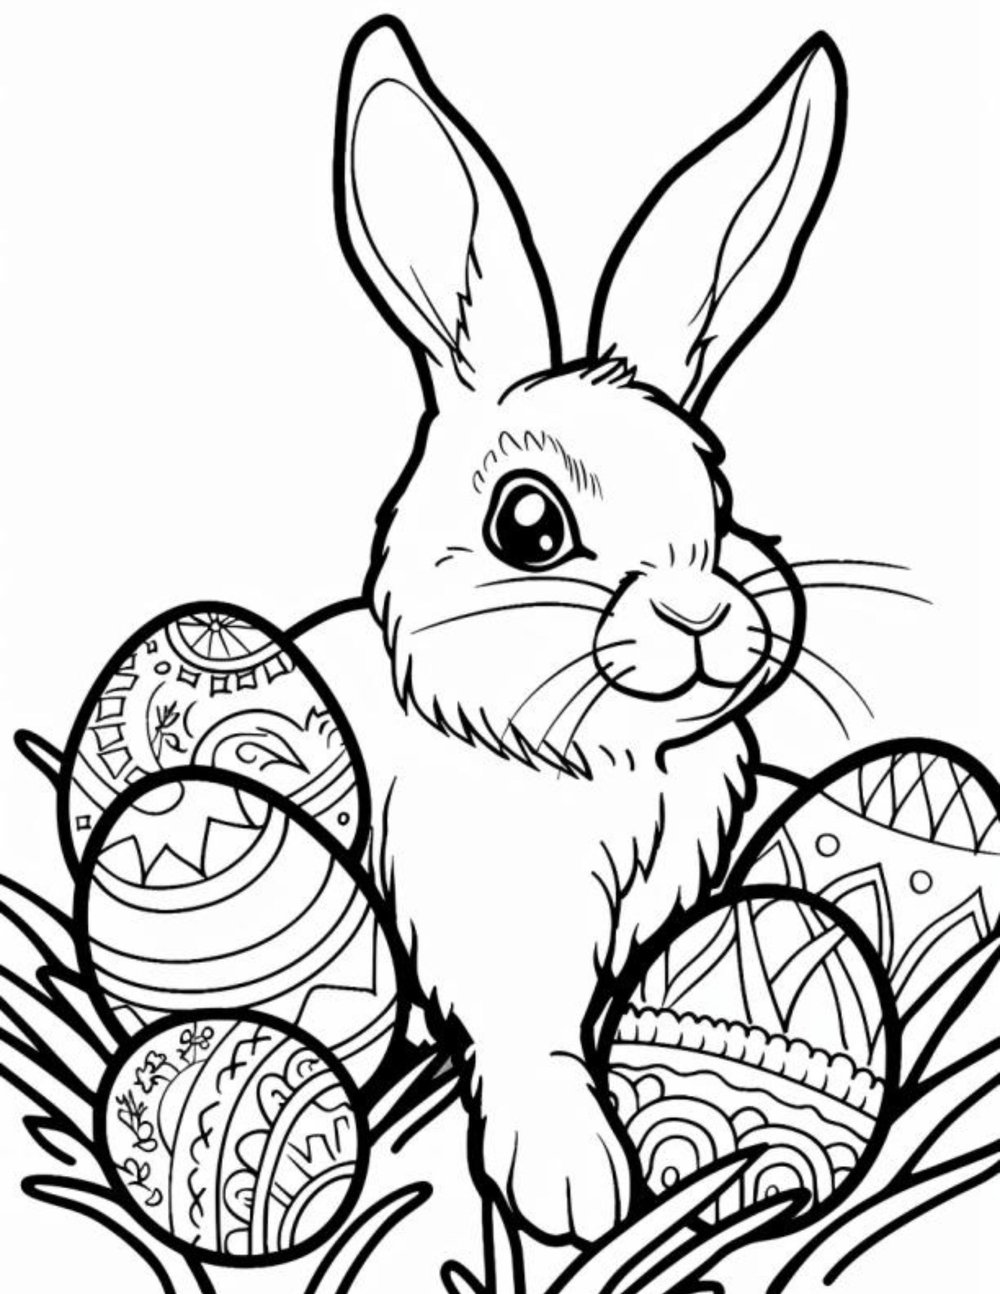 free bunny coloring page.jpg